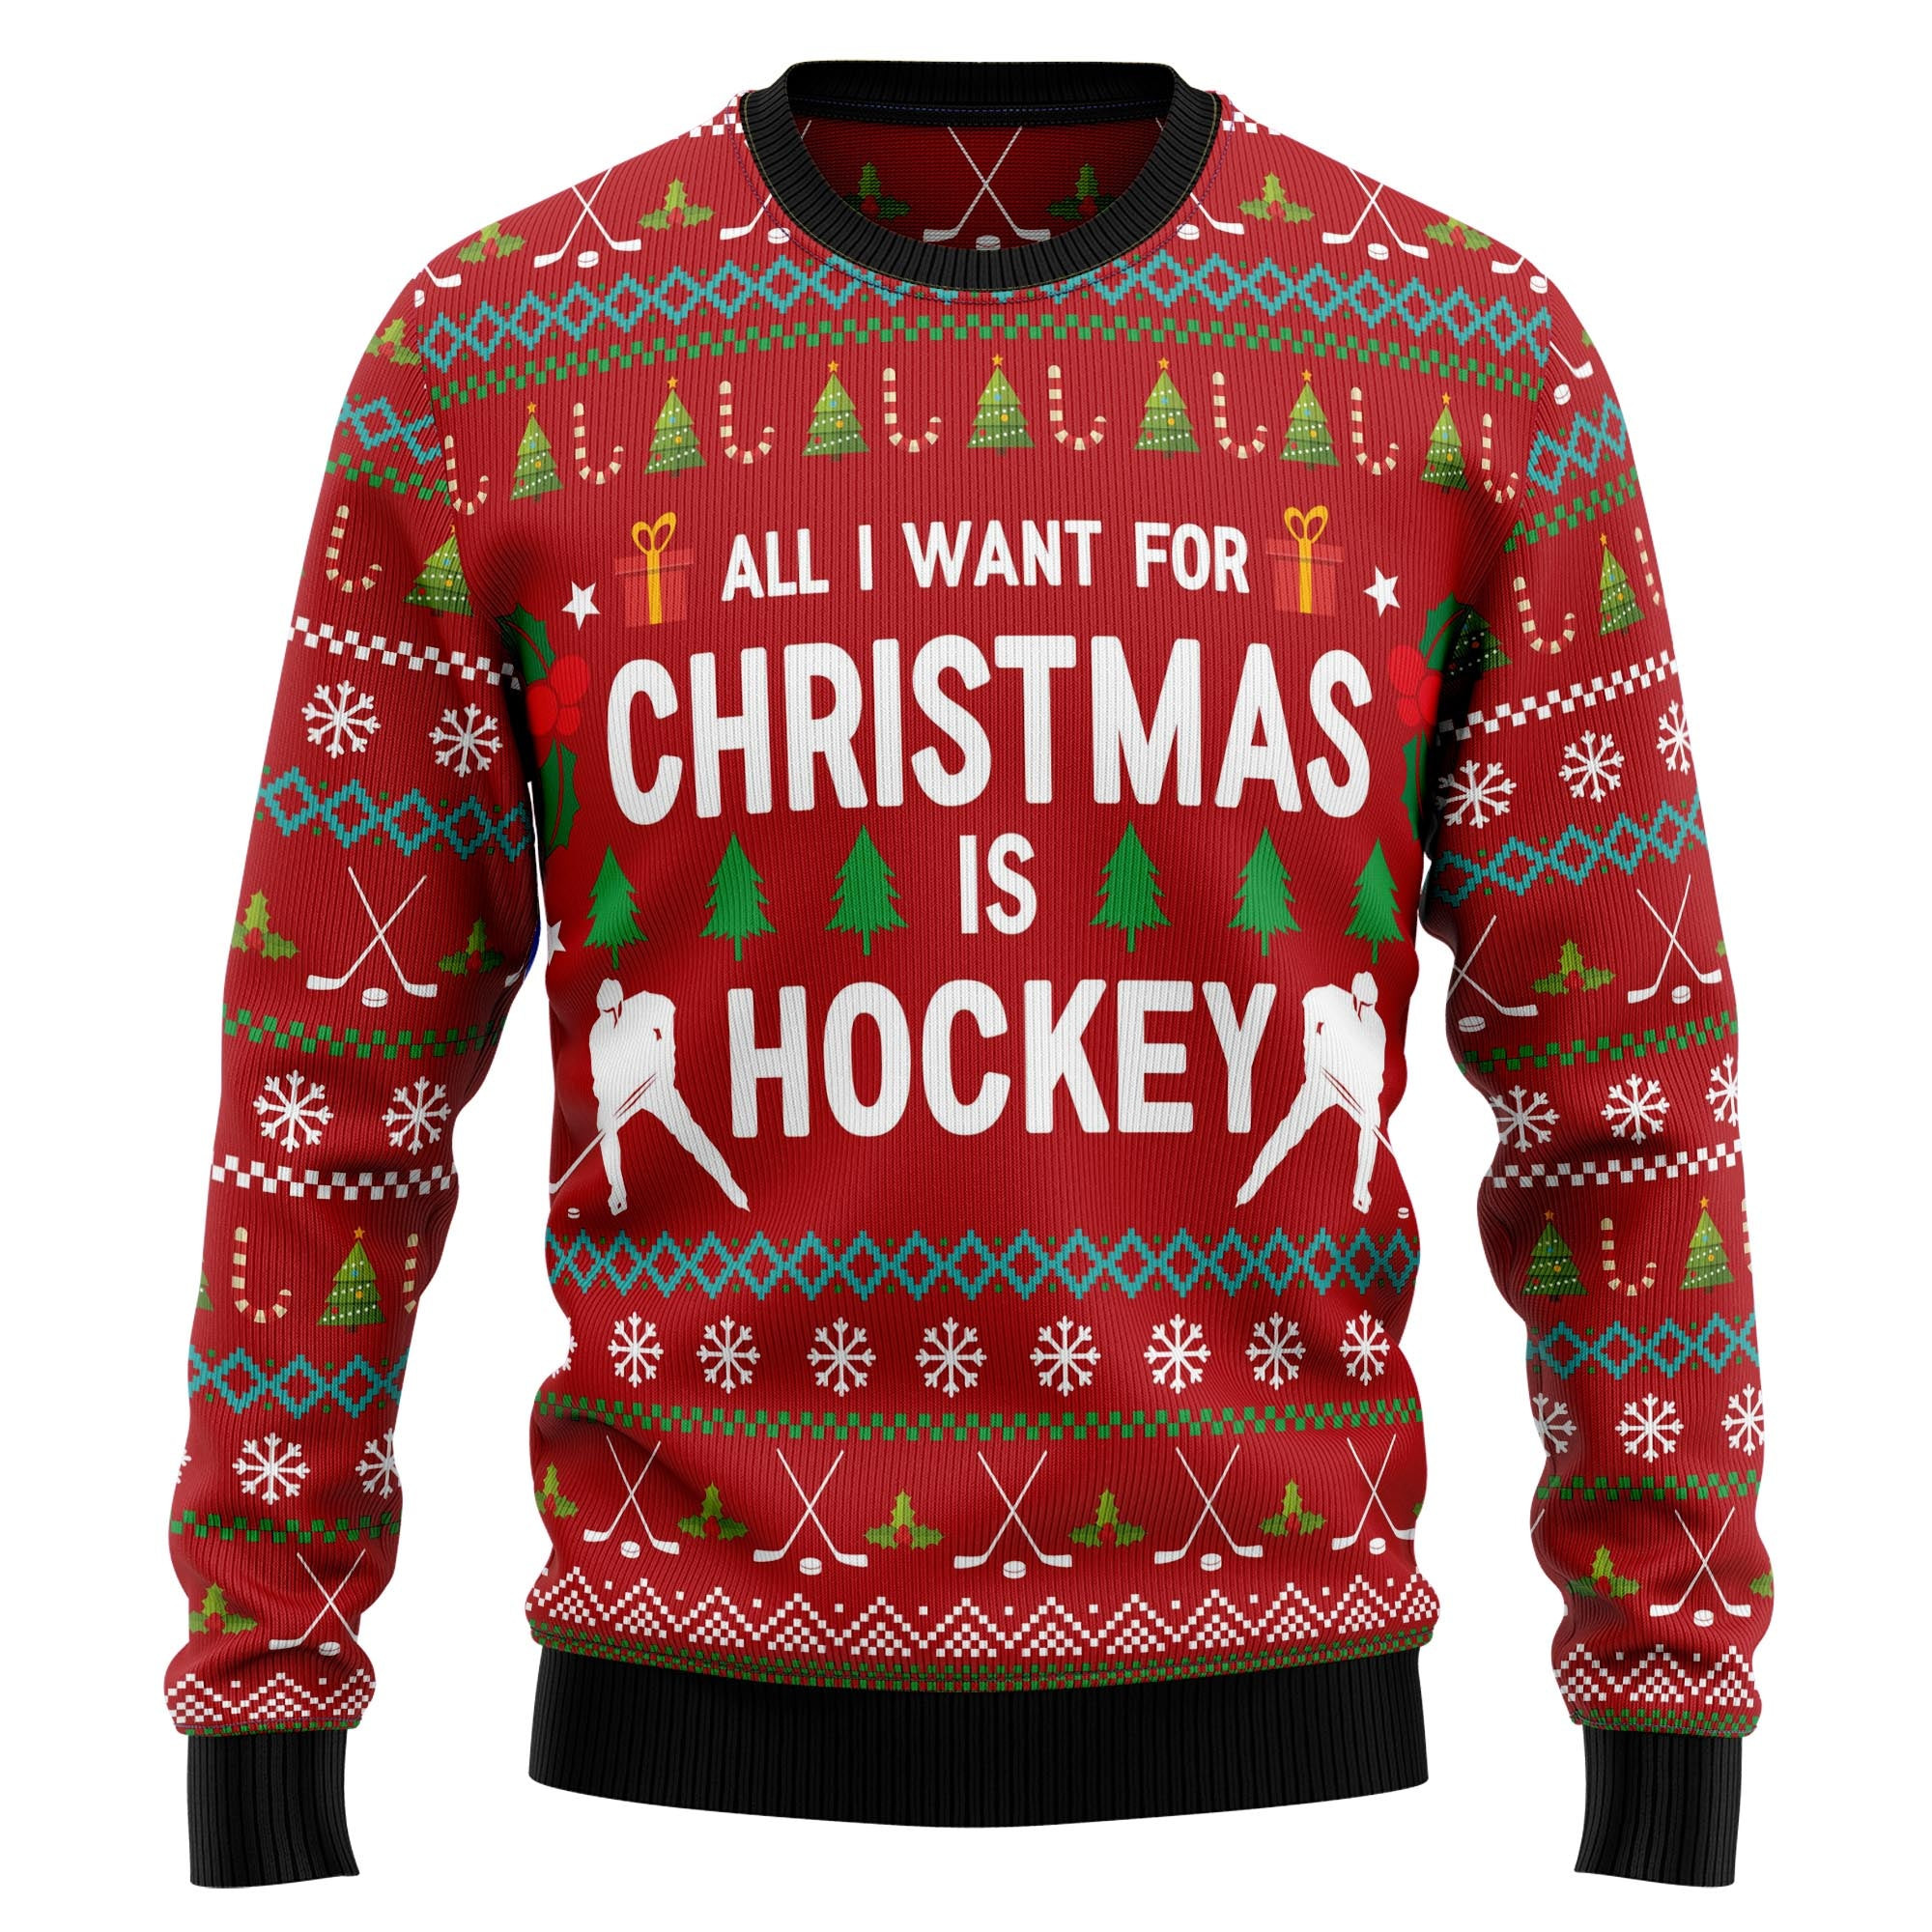 All I Want For Christmas Is Hockey Ugly Christmas Sweater, Ugly Sweater For Men Women, Holiday Sweater